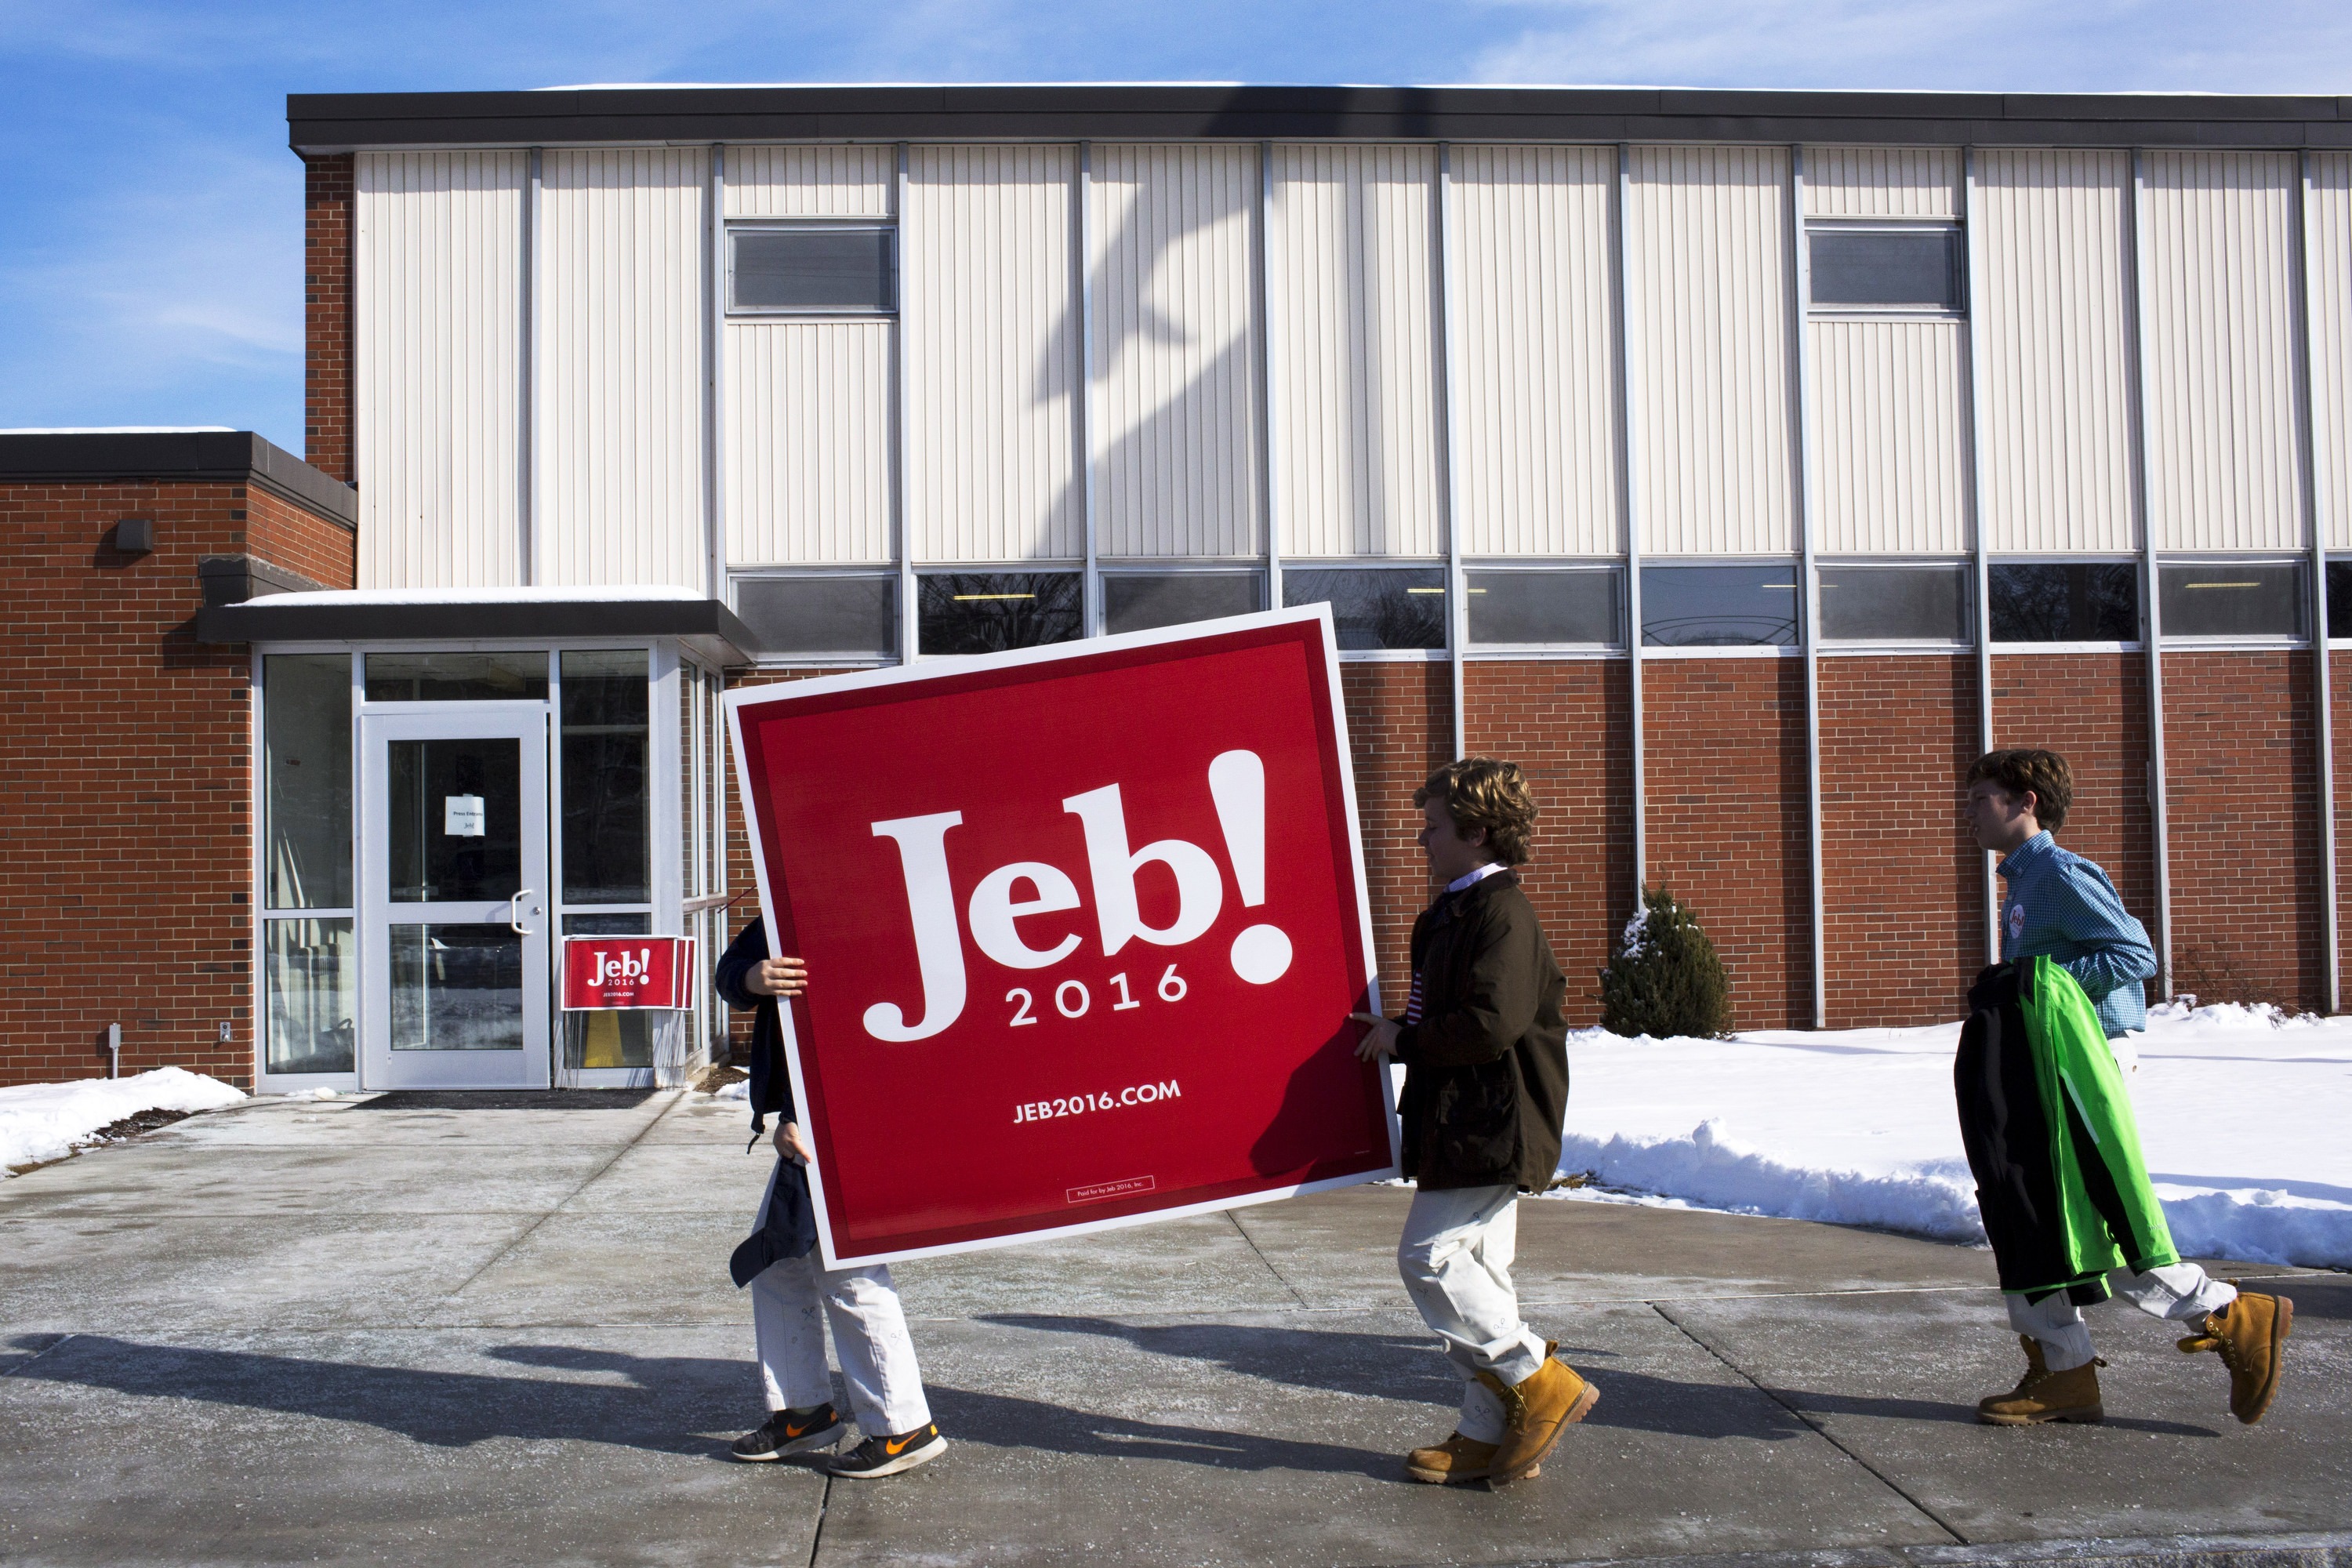 Supporters arrive at a town hall event for Republican presidential candidate Jeb Bush in  Bedford, N.H. on Feb. 6, 2016.